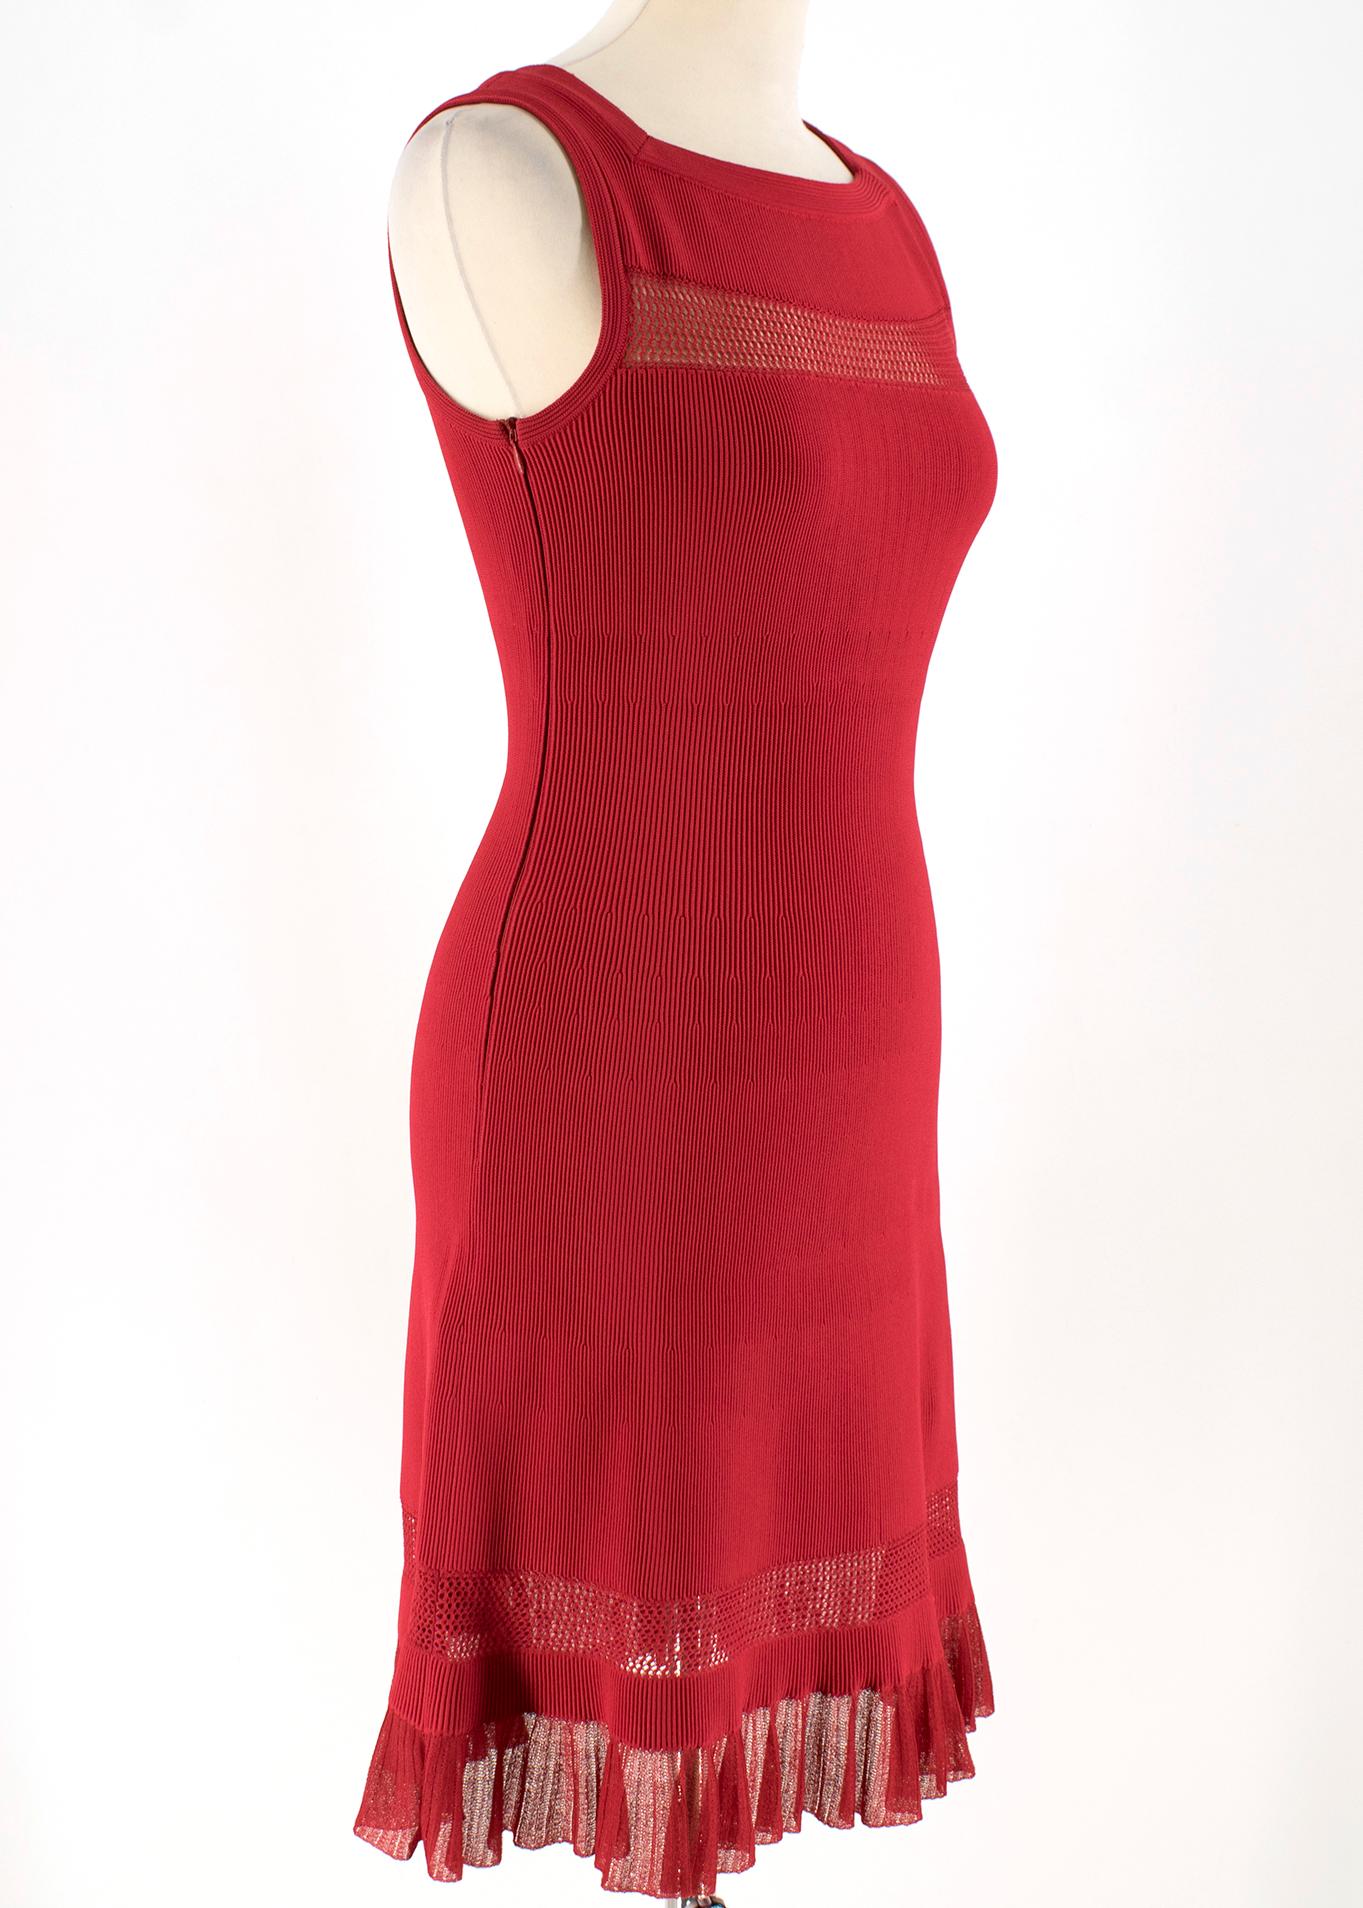 Alaia Red Fine Mesh Cut-Out Sleeveless Knit Dress

- Red, stretch fabric
- Sleeveless
- Fine Mesh cutouts to hem and bust 
- Ruffle laced hem 
- Fitted
- Concealed zip fastening at the left side
- Square neckline
- 80% viscose, 16% polyester, 4%